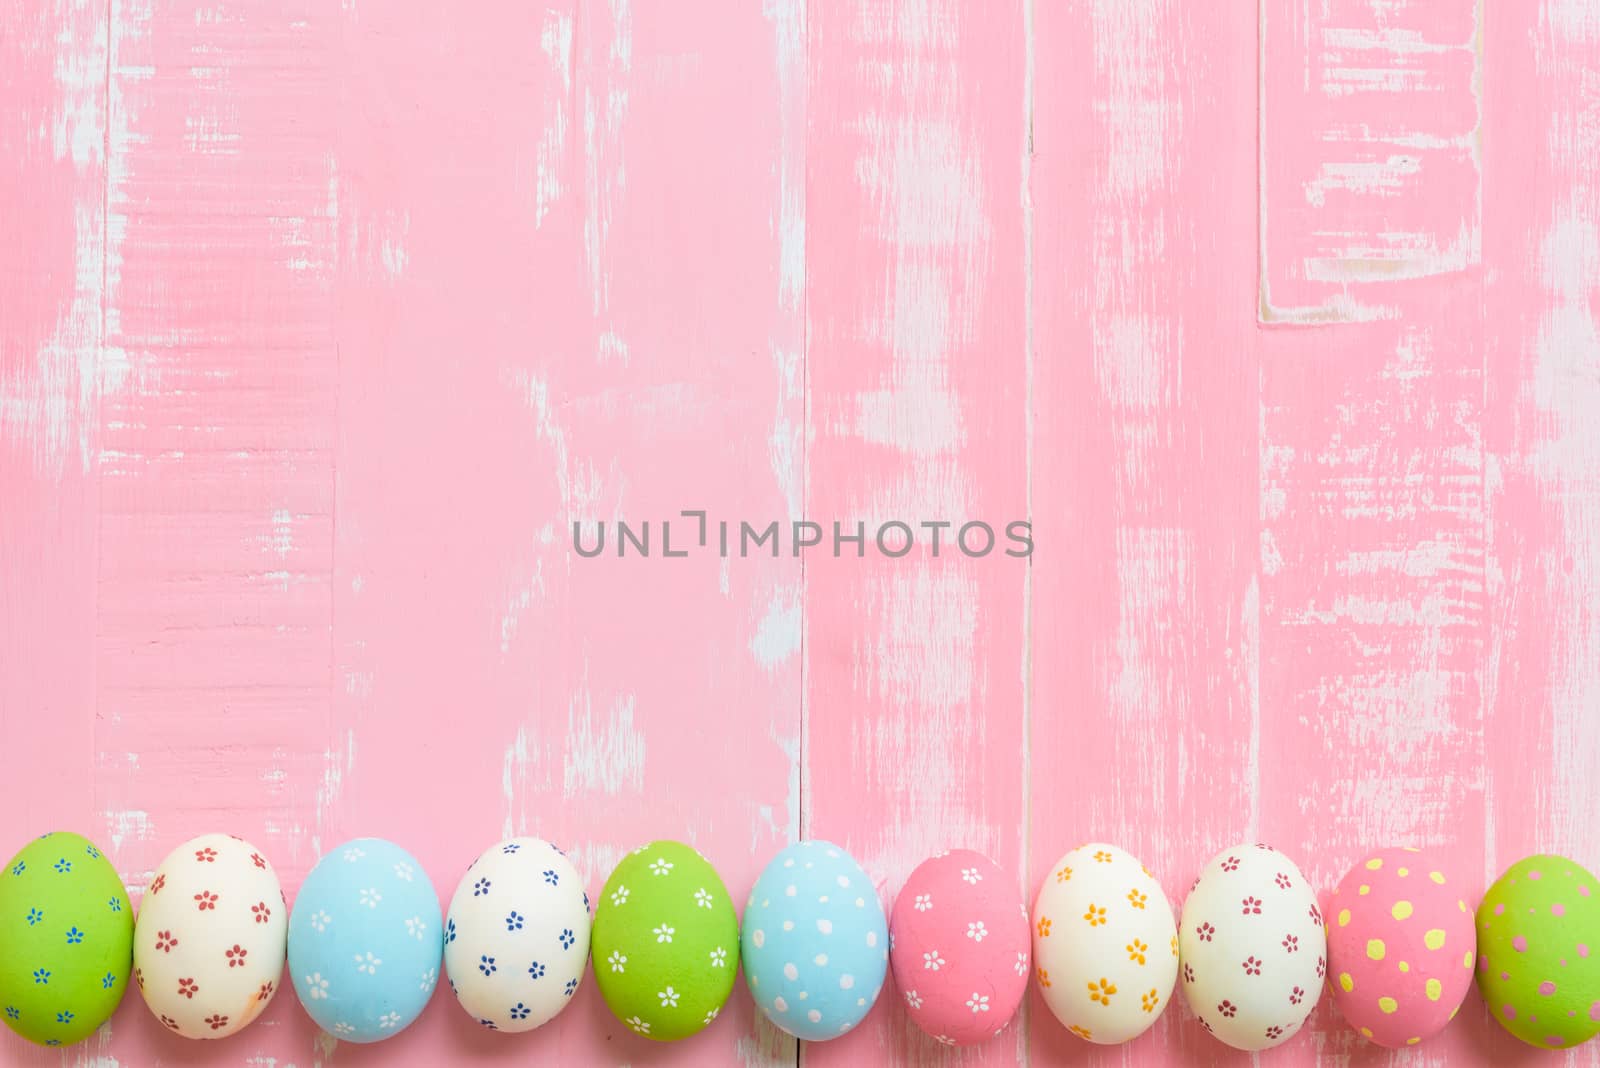 Happy easter! Row Easter eggs with colorful paper flowers on bri by spukkato